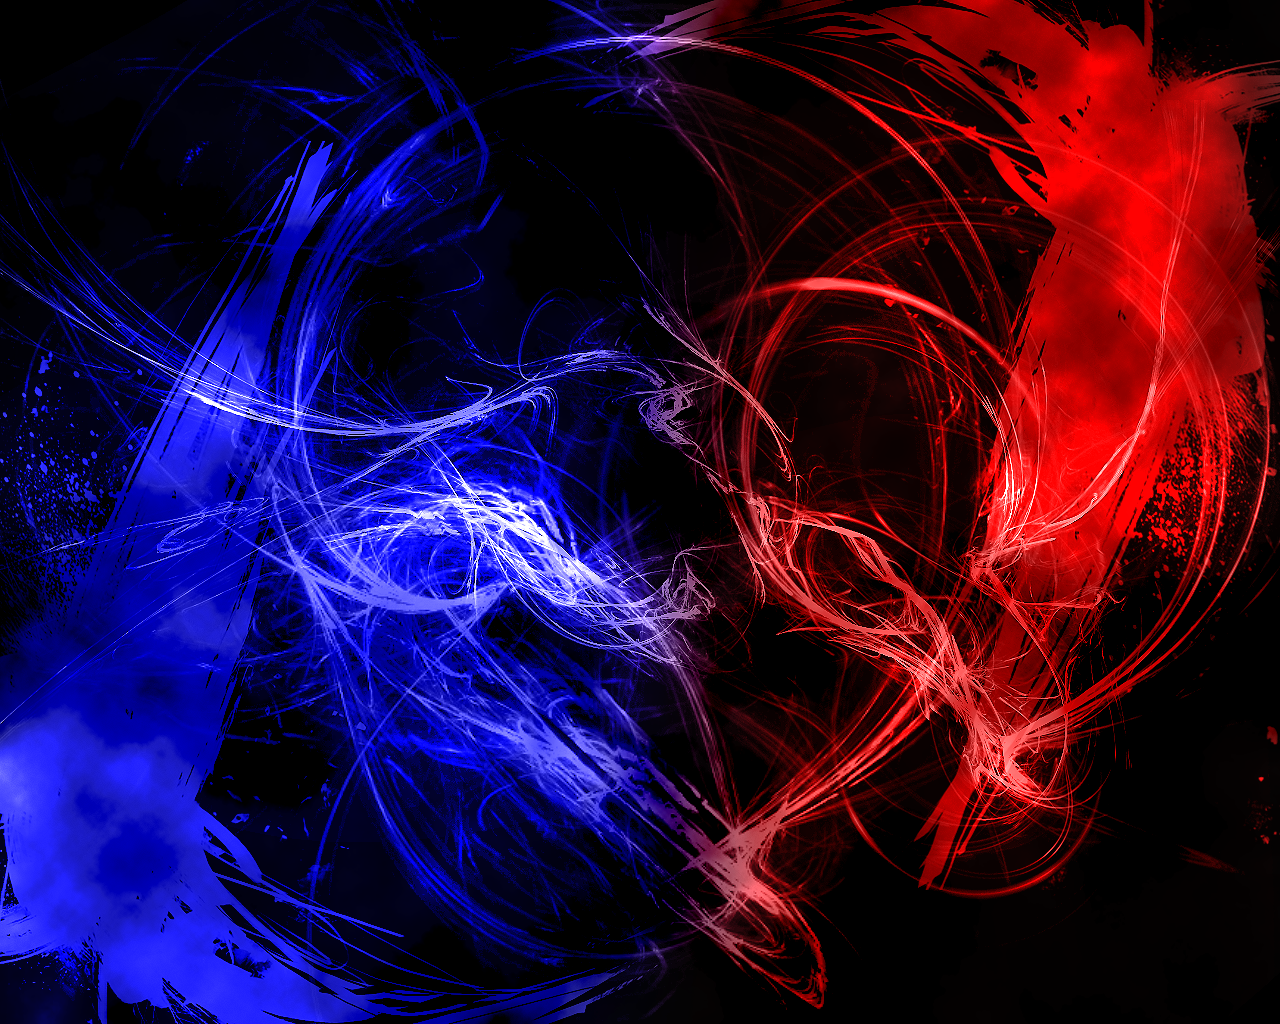 Red Vs Blue Abstract Wallpaper By Br8y16 Customization